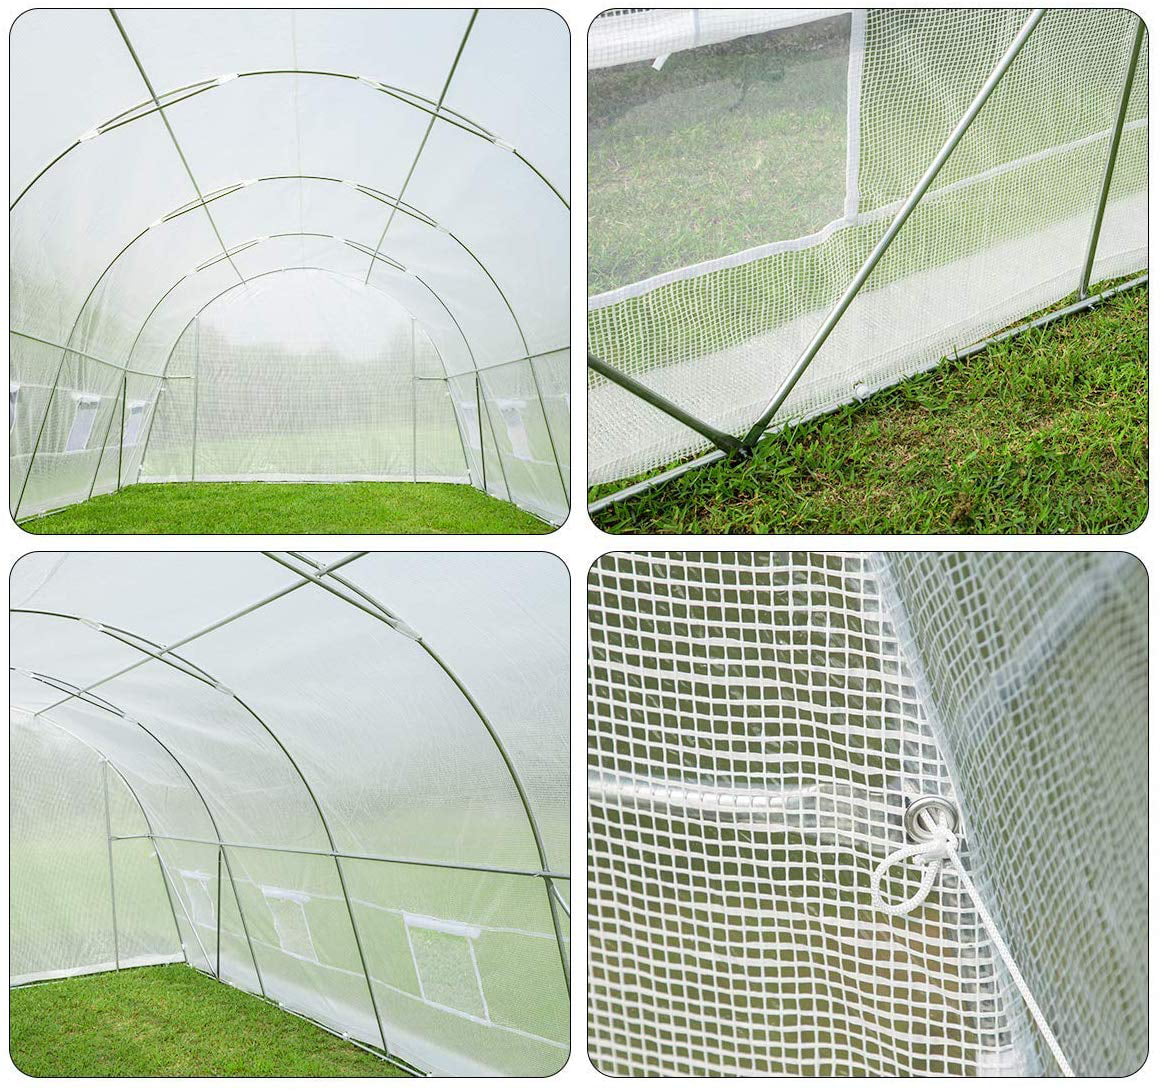 Mellcom 20 x 10 x 7 Greenhouse Large Gardening Plant Hot House Portable Walking in Tunnel Tent,Green 